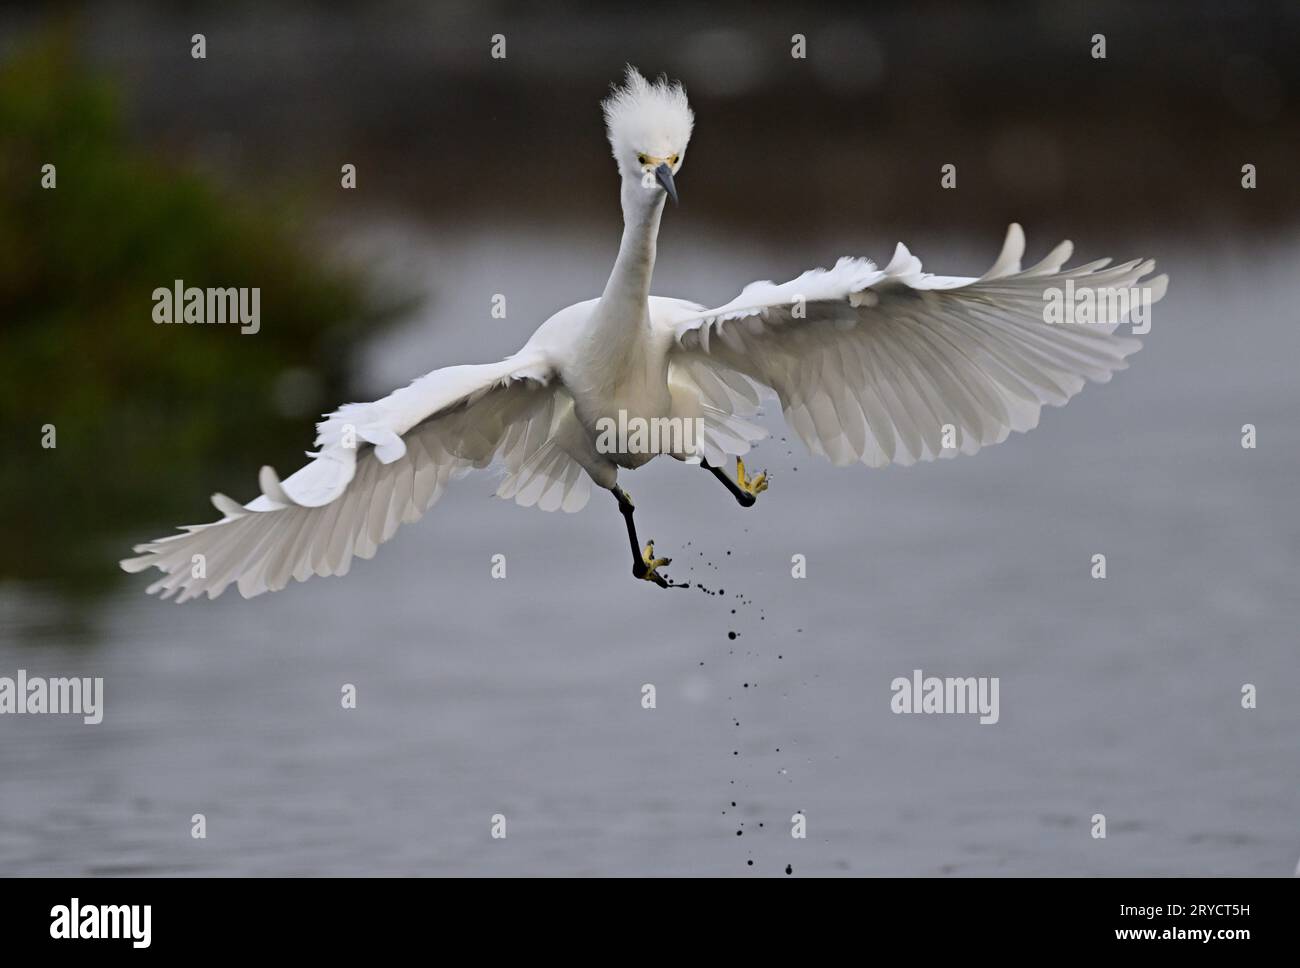 A Snowy Egret Escaping a Fight Stock Photo